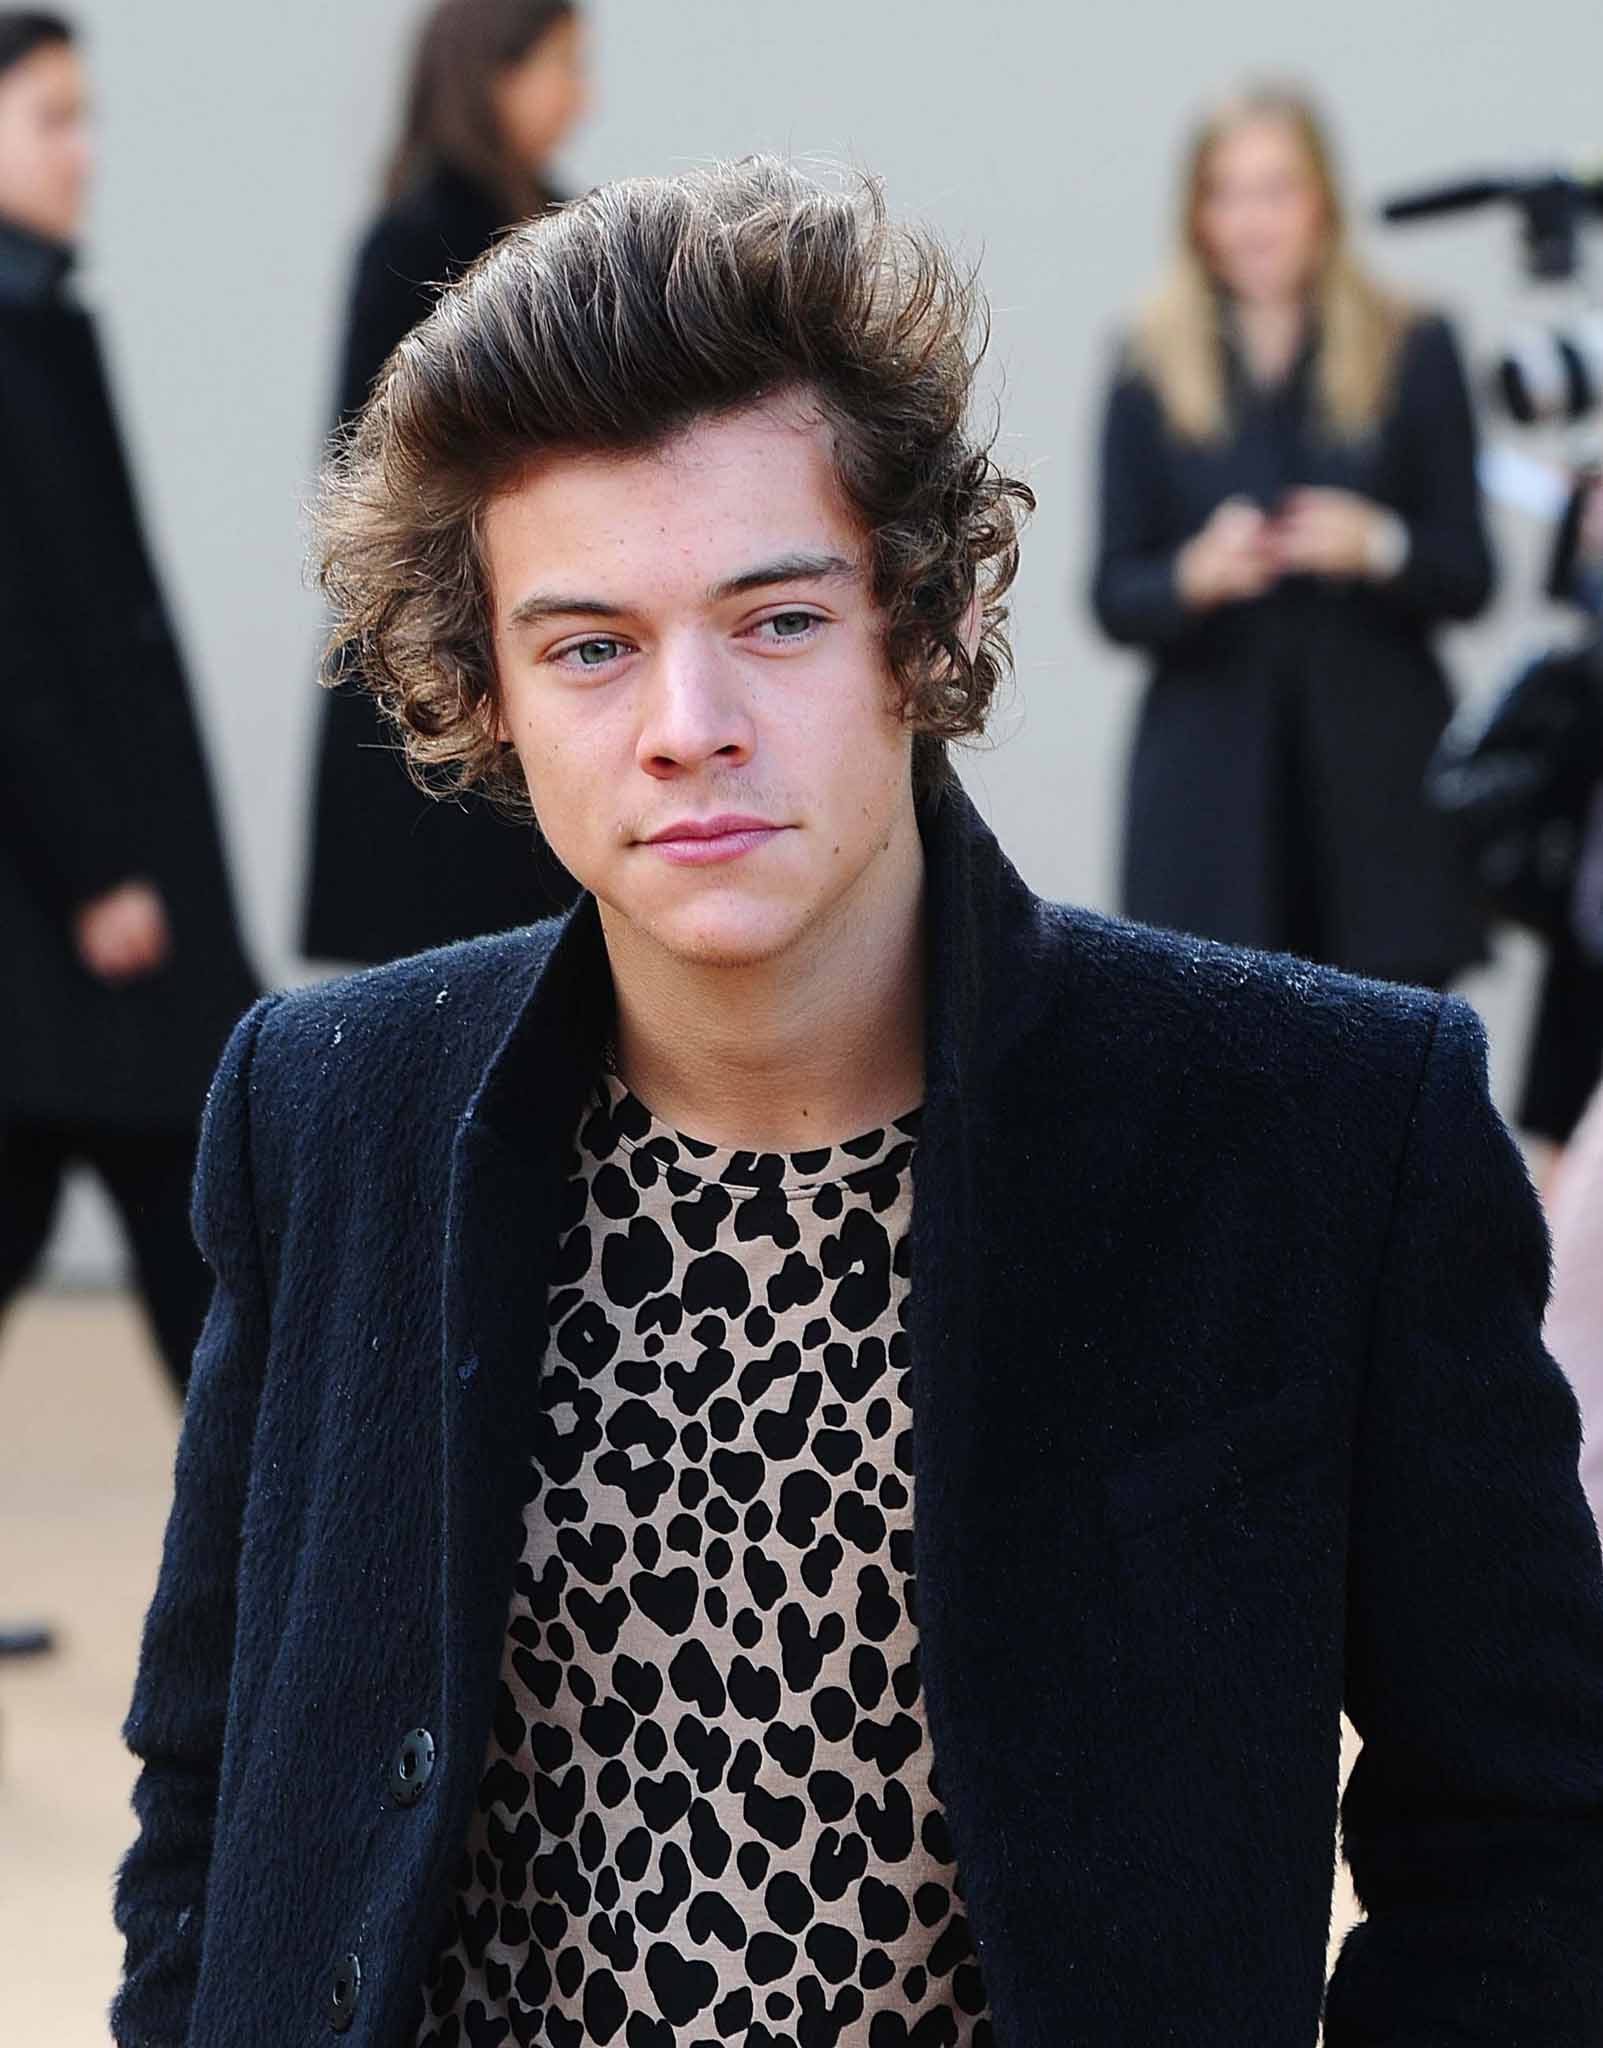 One Direction star Harry Styles who says he has no plans to follow his pal Cara Delevingne down the catwalk.